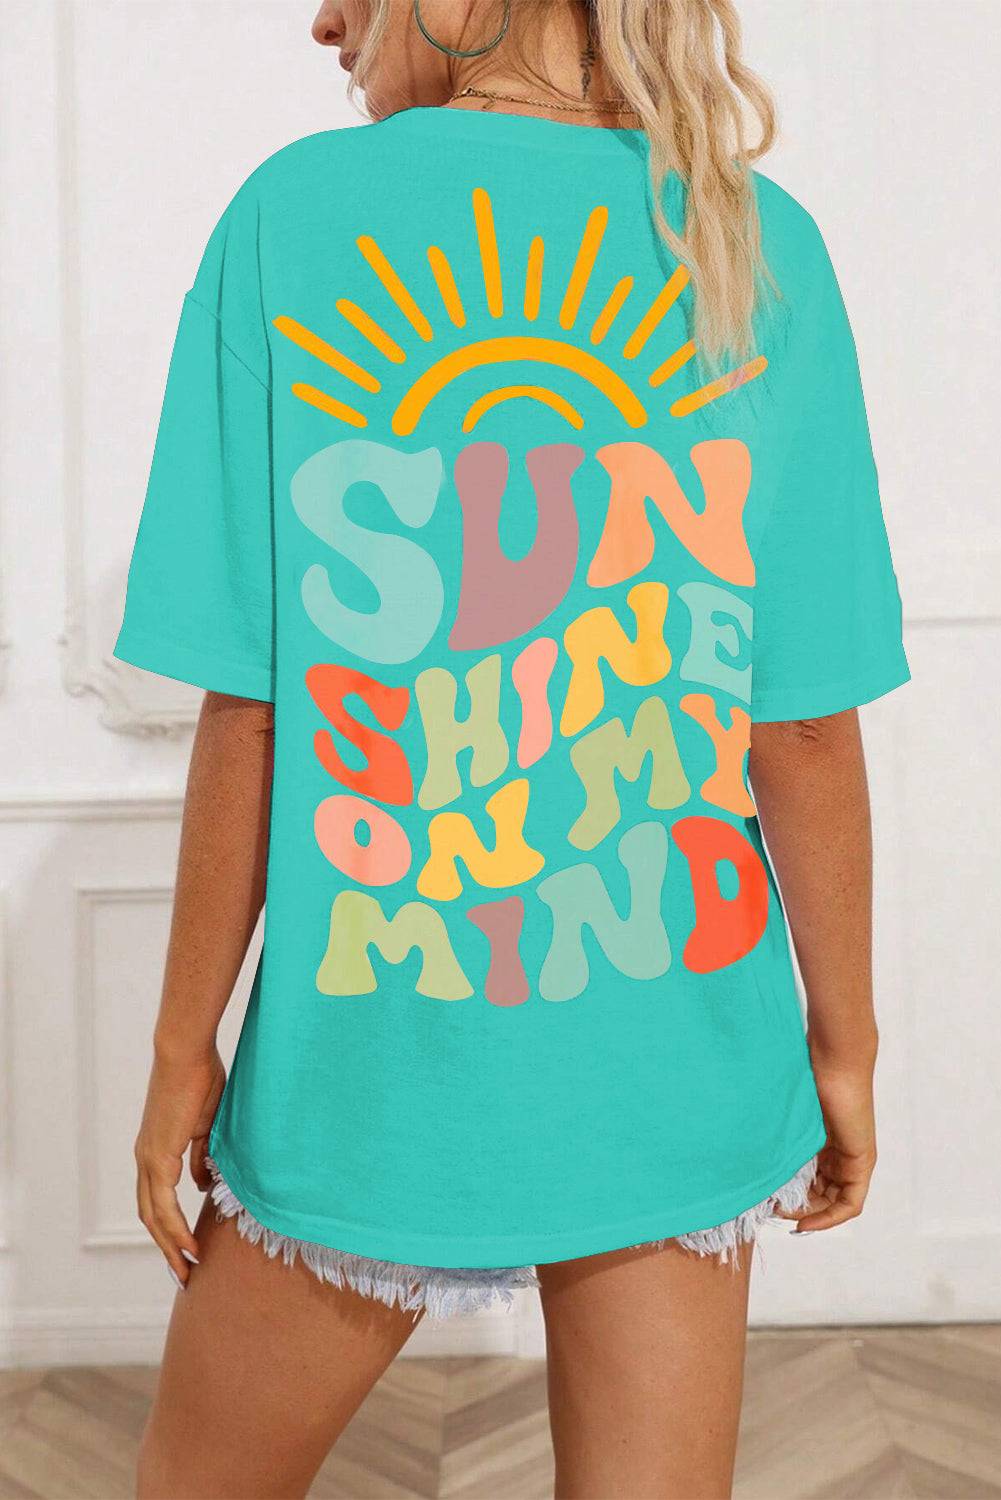 a woman wearing a turquoise shirt with the words sun shine in rainbow on it